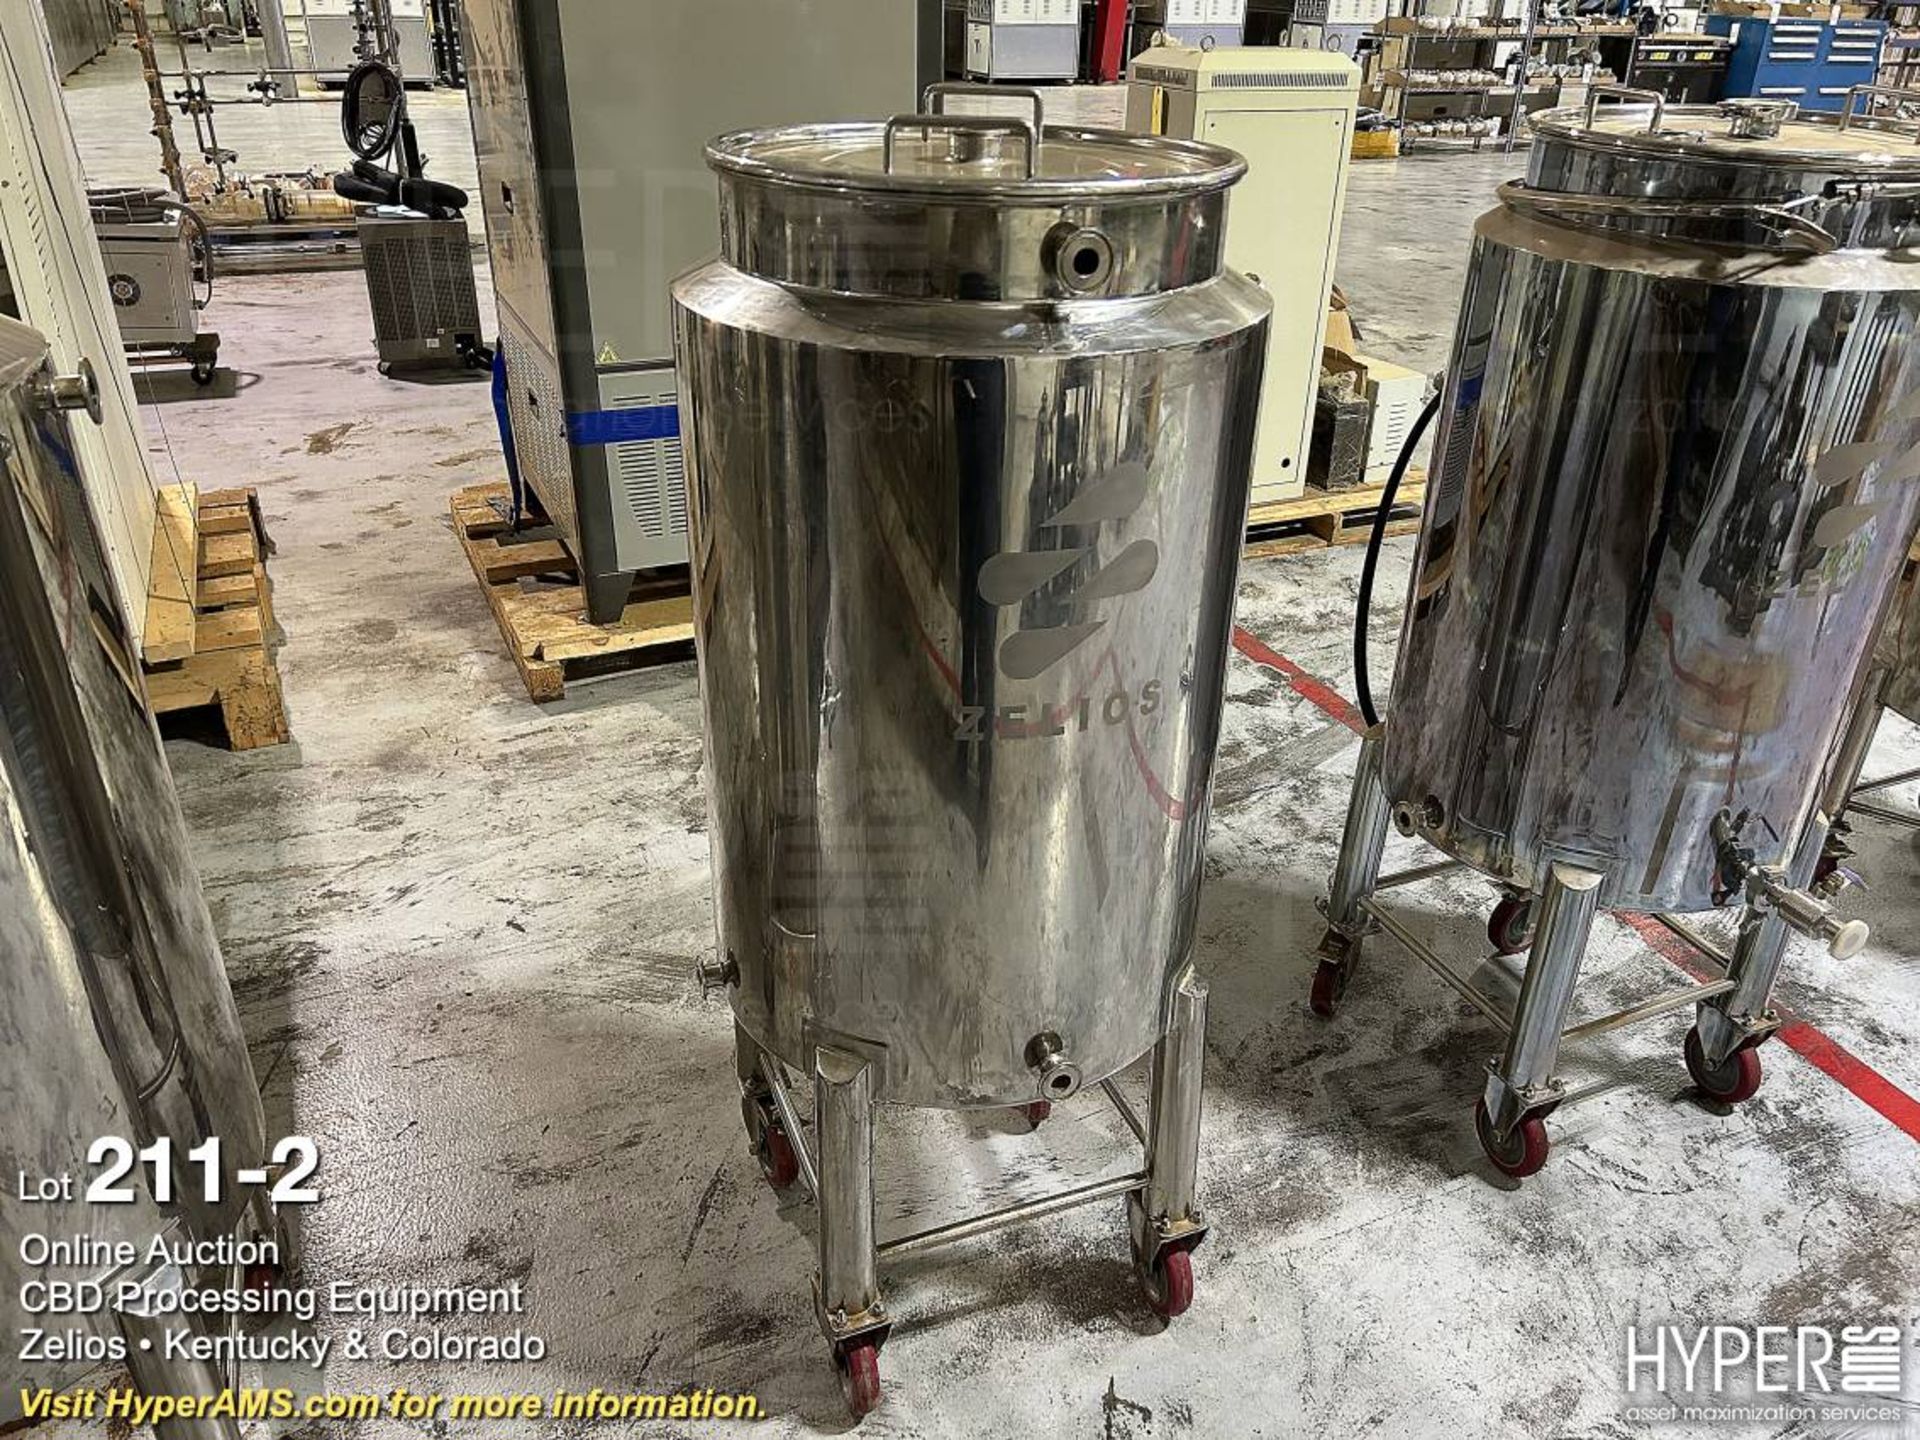 Approx. 30-Liter Stainless Steel Jacketed Vessel - Image 2 of 3